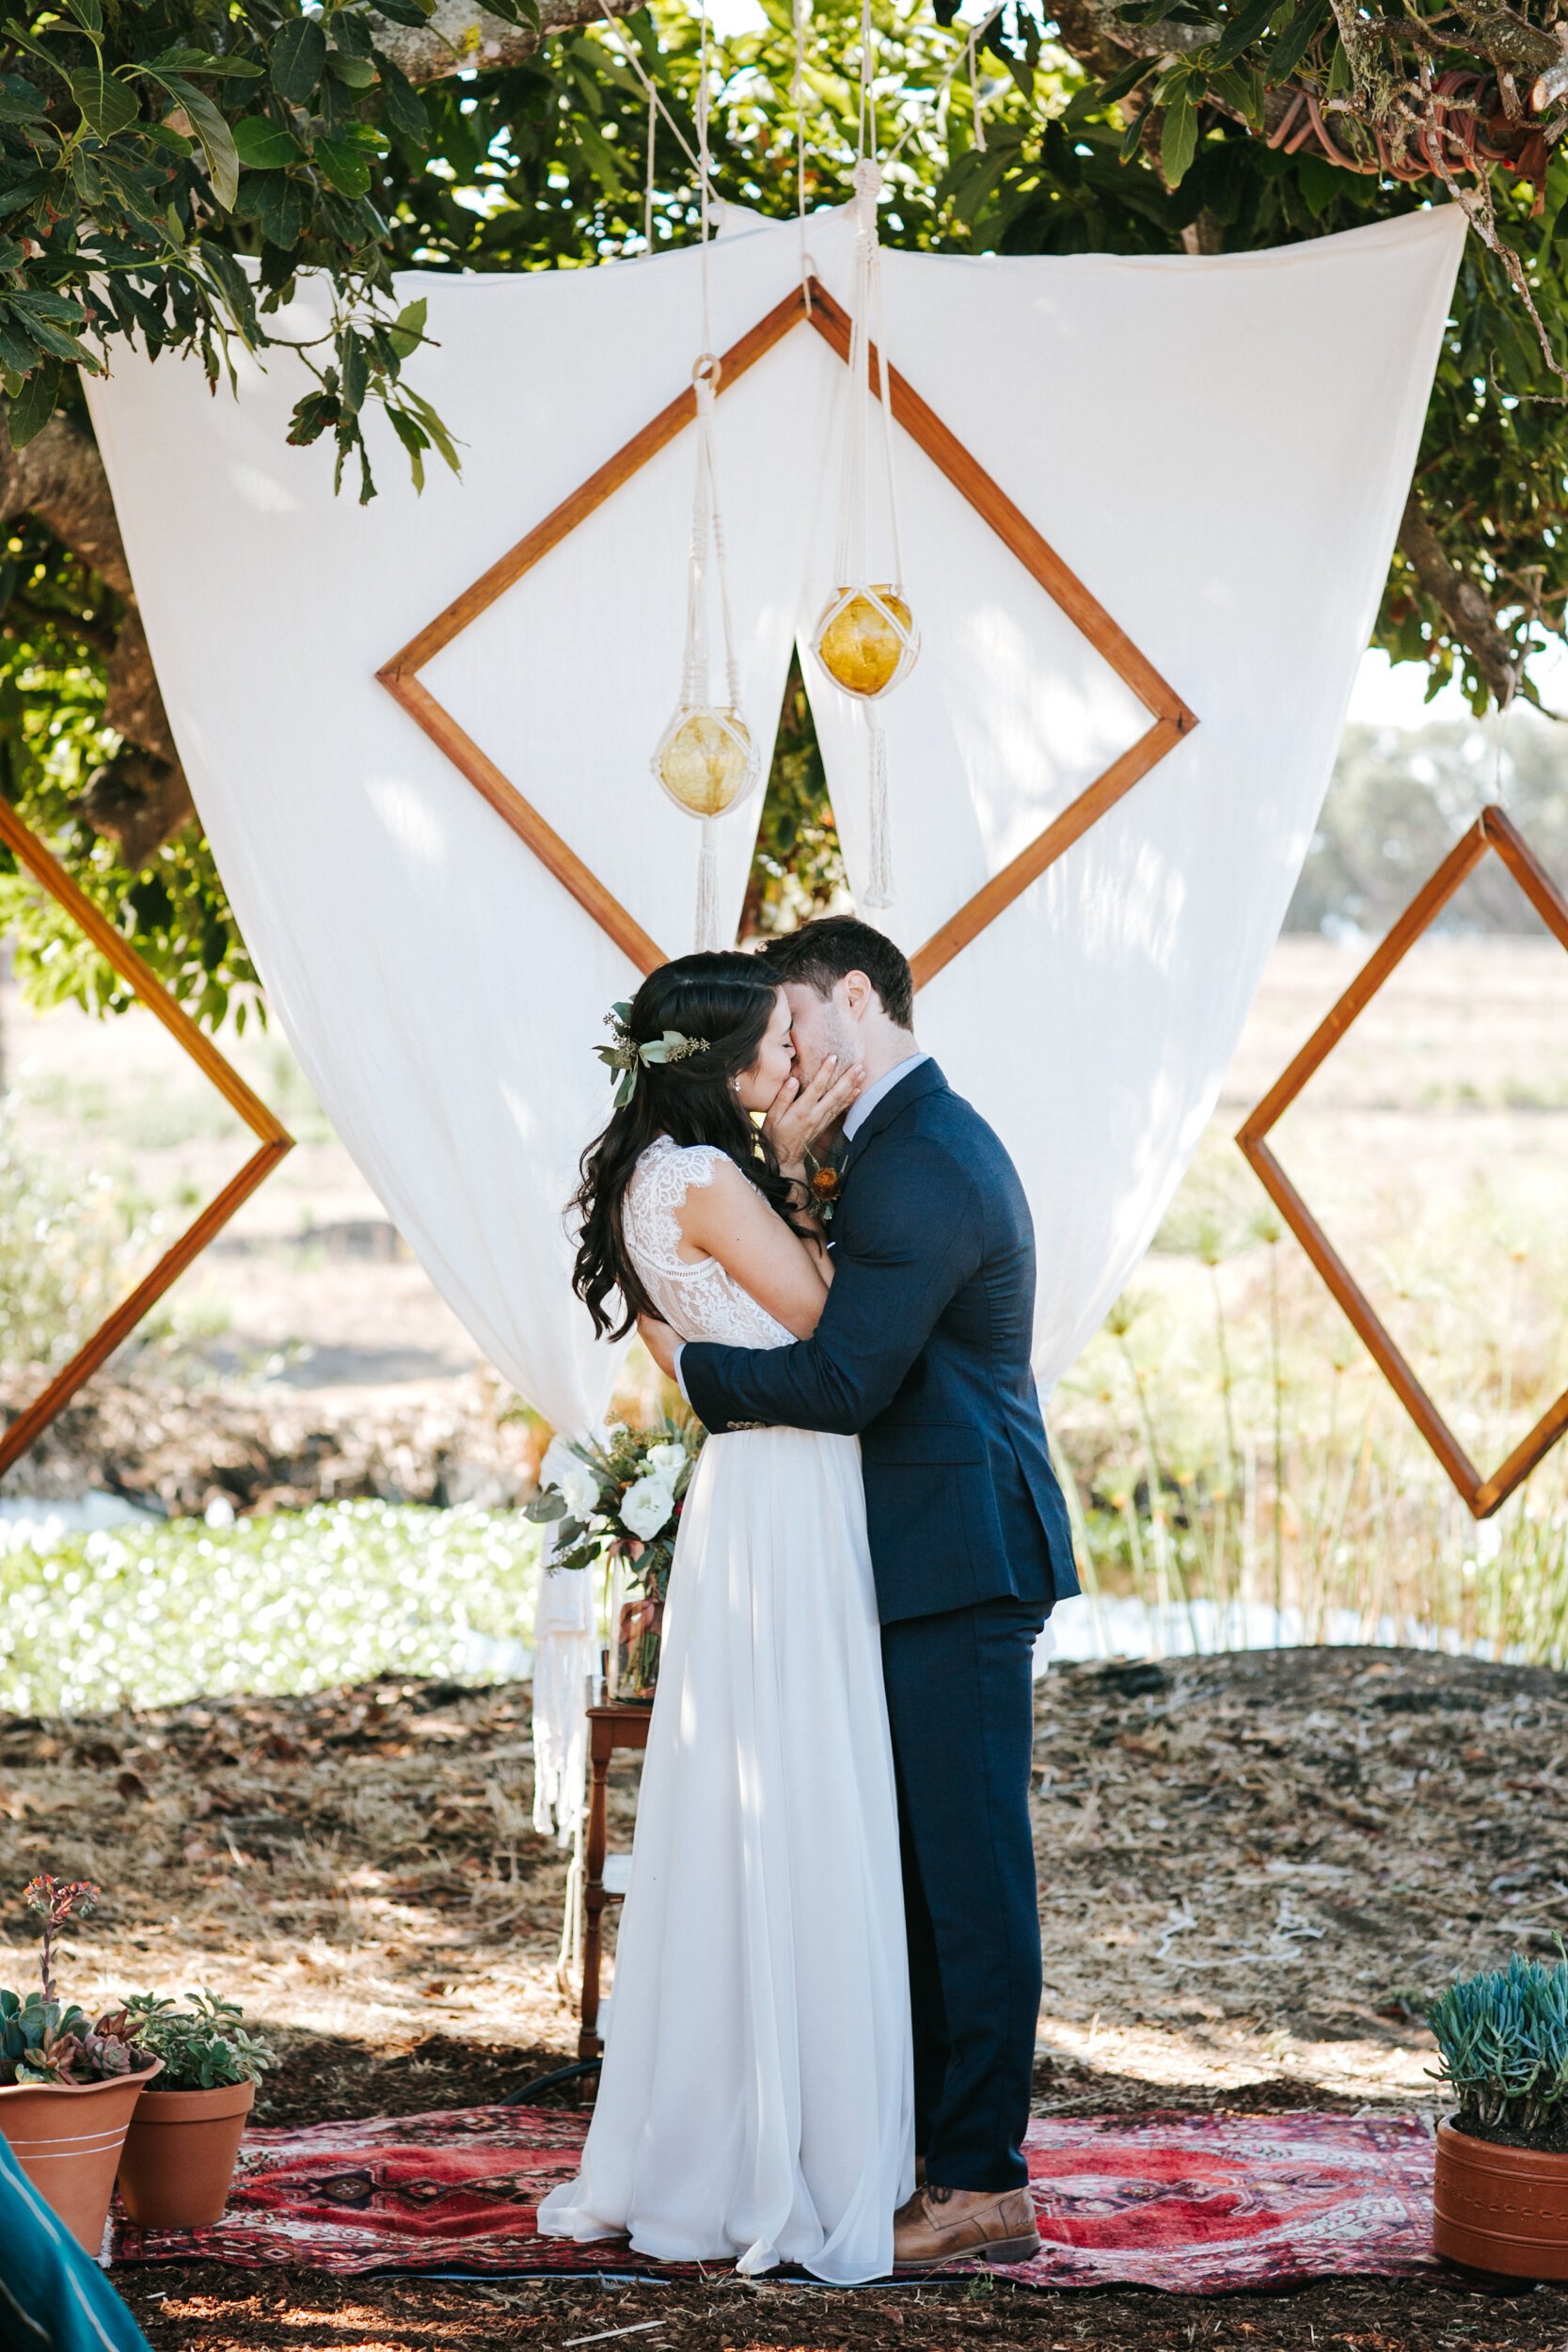 www.santabarbarawedding.com | Elli Lauren Weddings | Dos Pueblos Orchid Farm | Rebekah Xiques | Suzanne Xiques | The Tent Merchant | Tommy Coppers | Bride and Groom First Kiss at Ceremony 